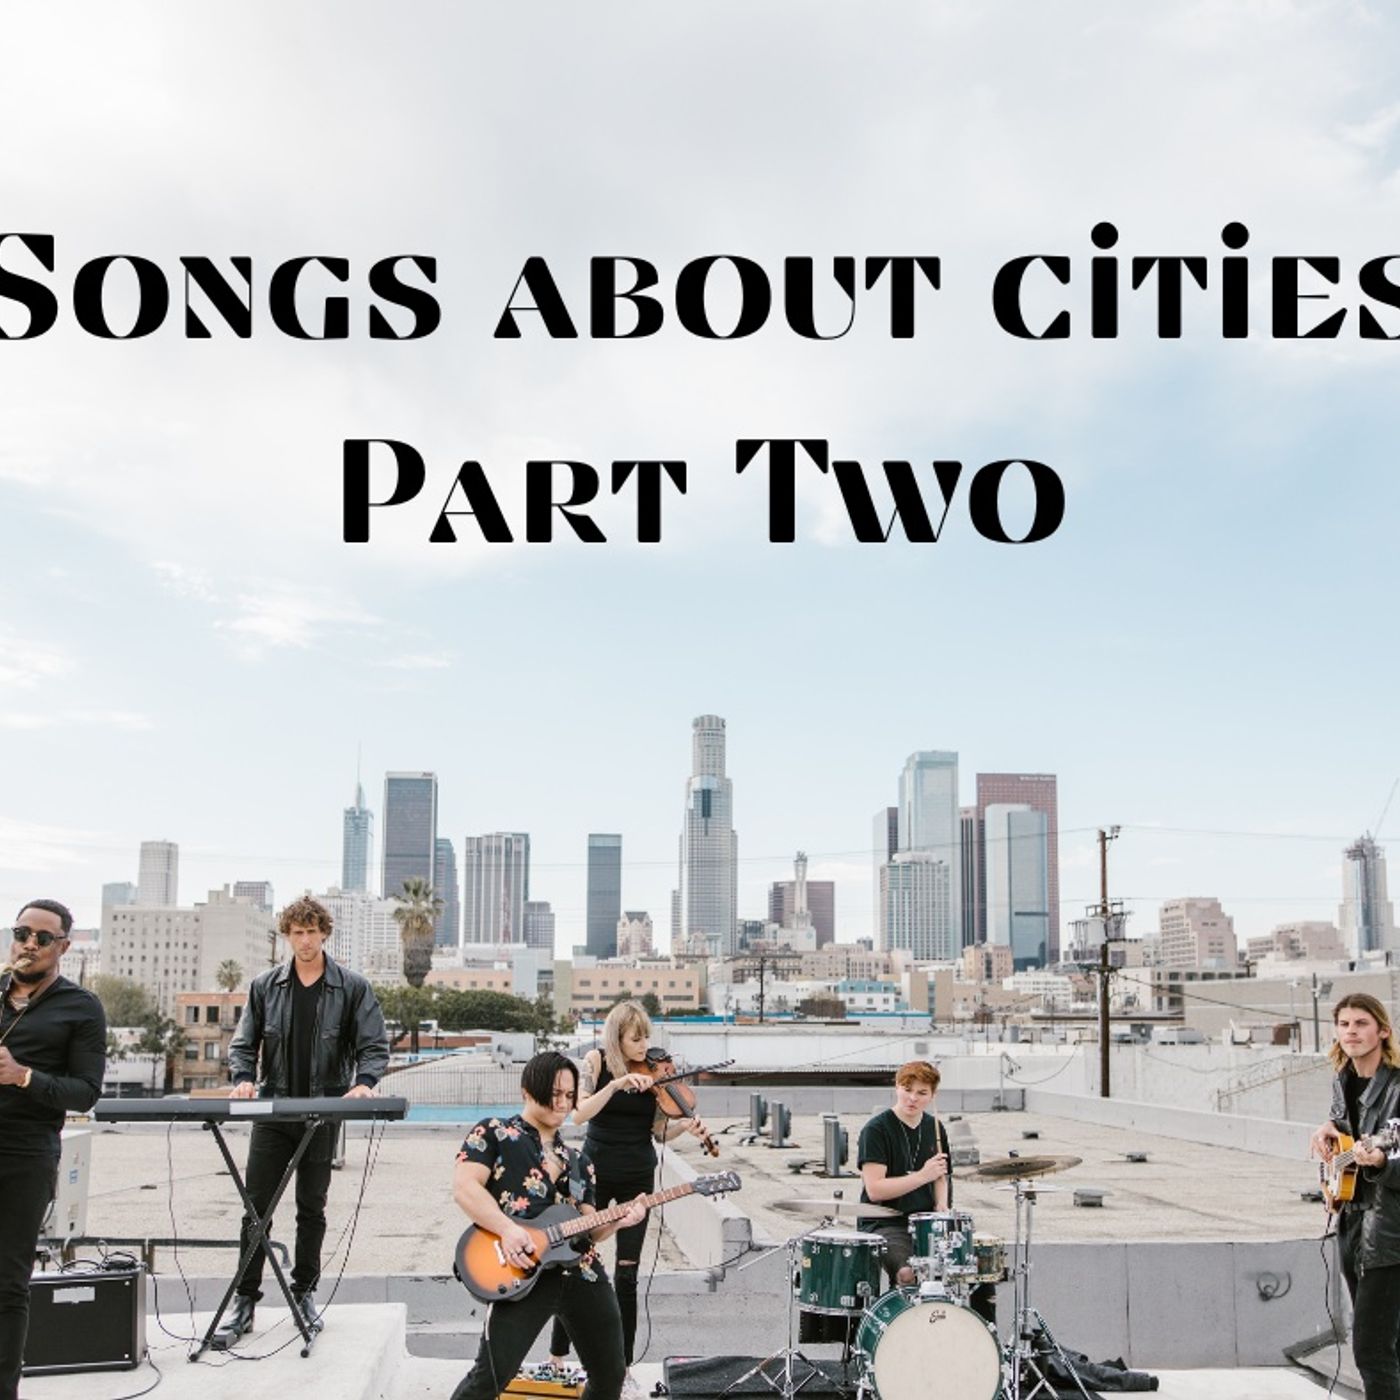 Songs about cities Part 2